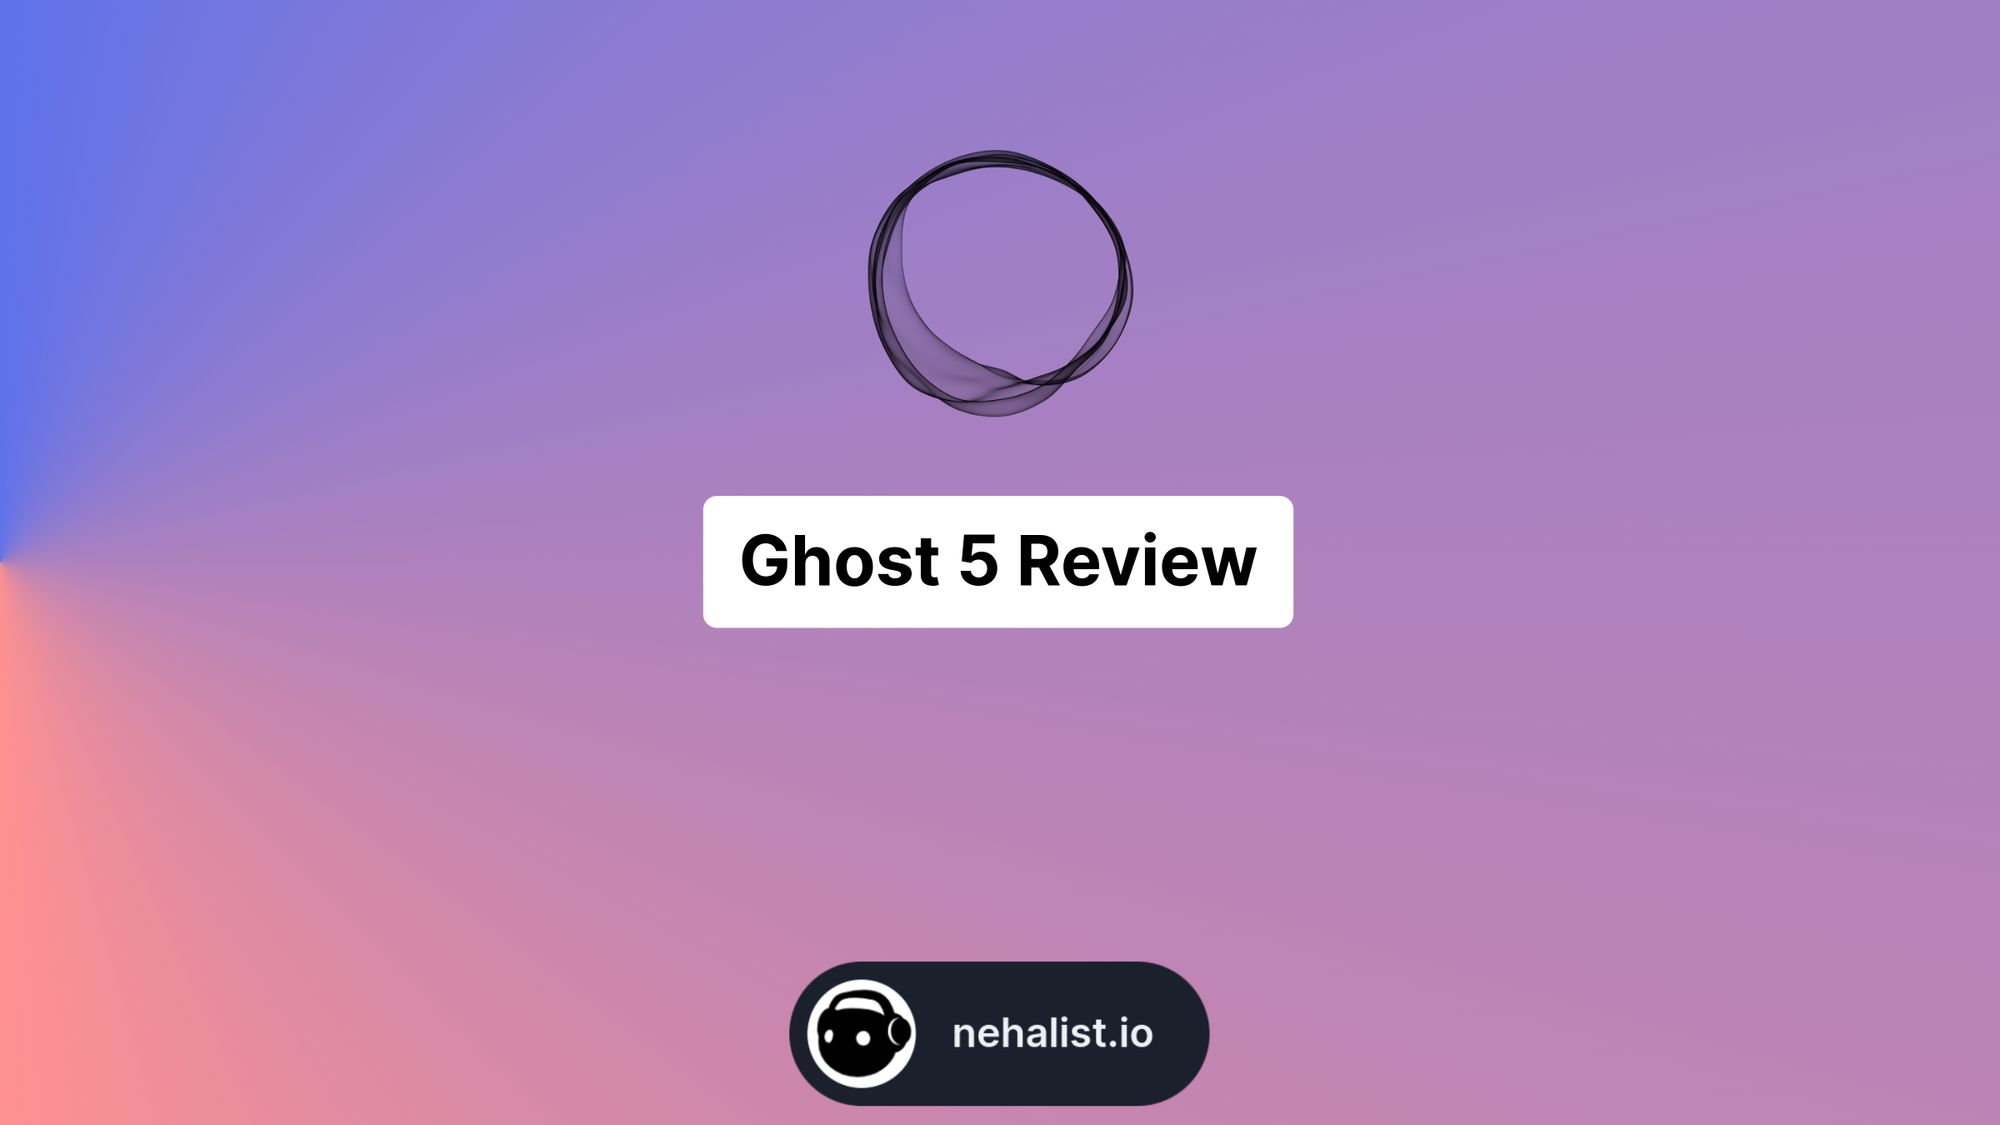 Reviewing the Ghost 5 blogging platform - The good, the bad, and the ugly